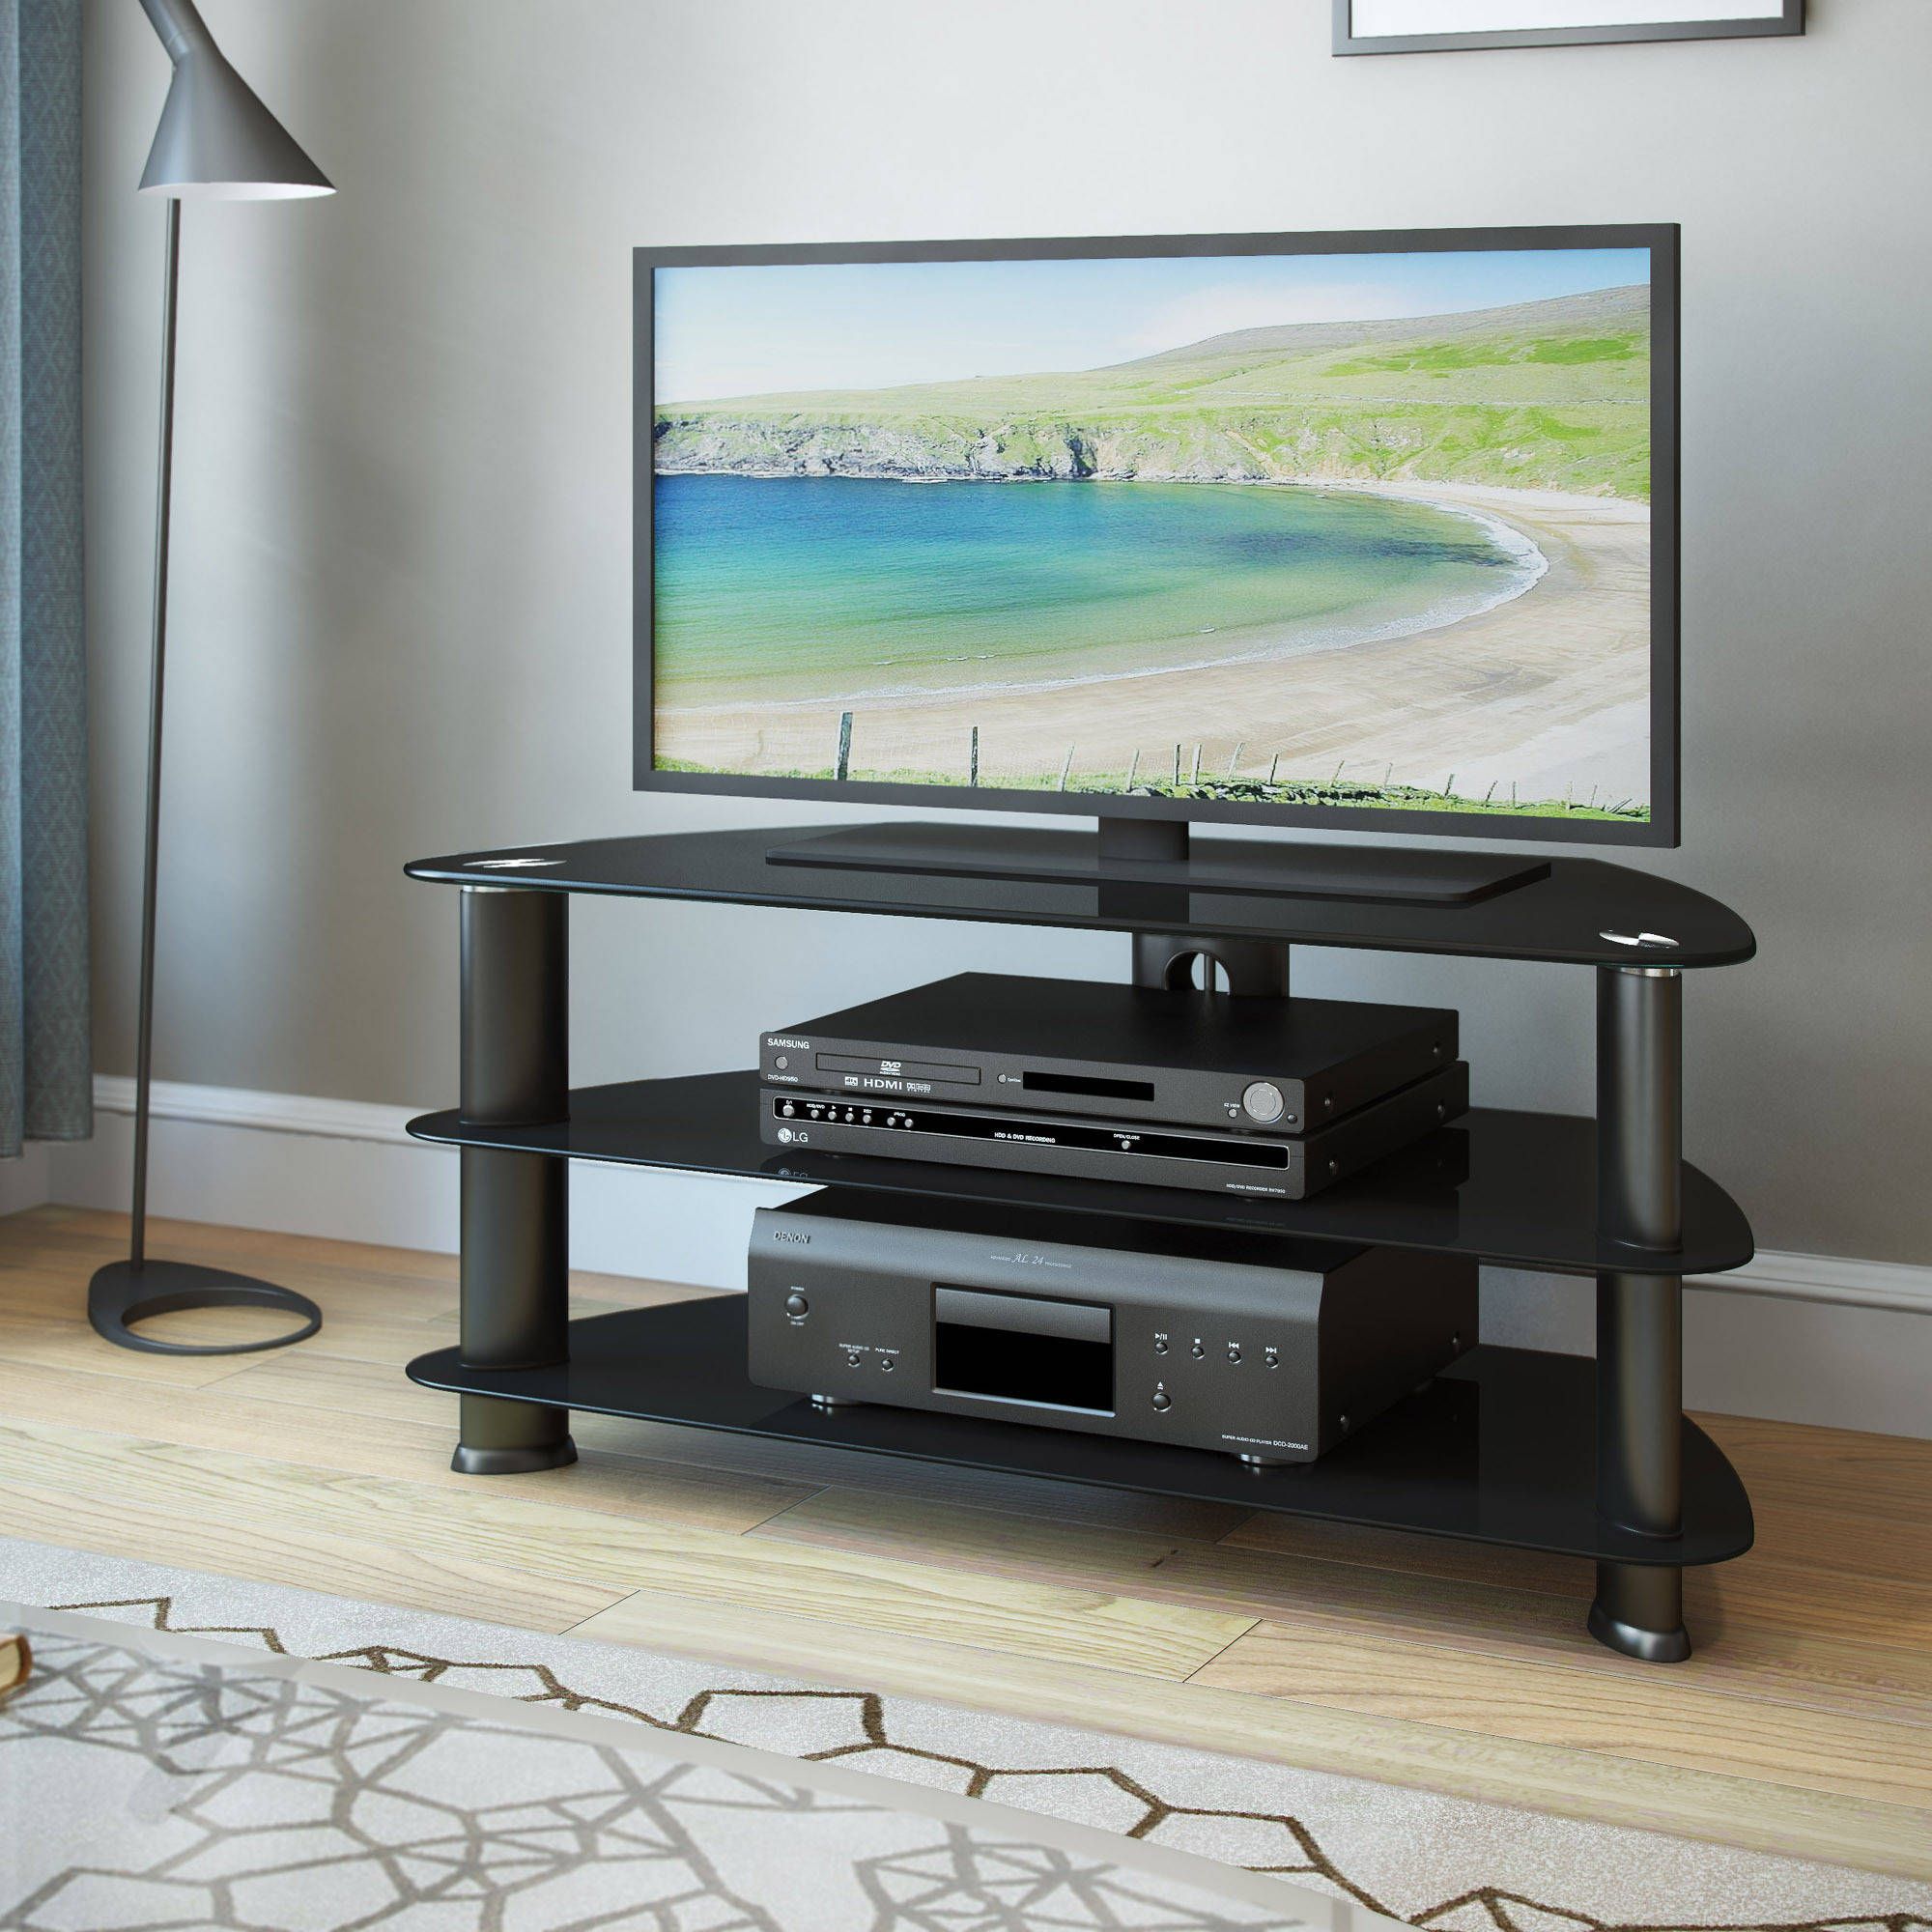 Laguna Satin Black Corner Tv Stand For Tvs Up To 50 With Regard To Corner Tv Stands (View 1 of 15)